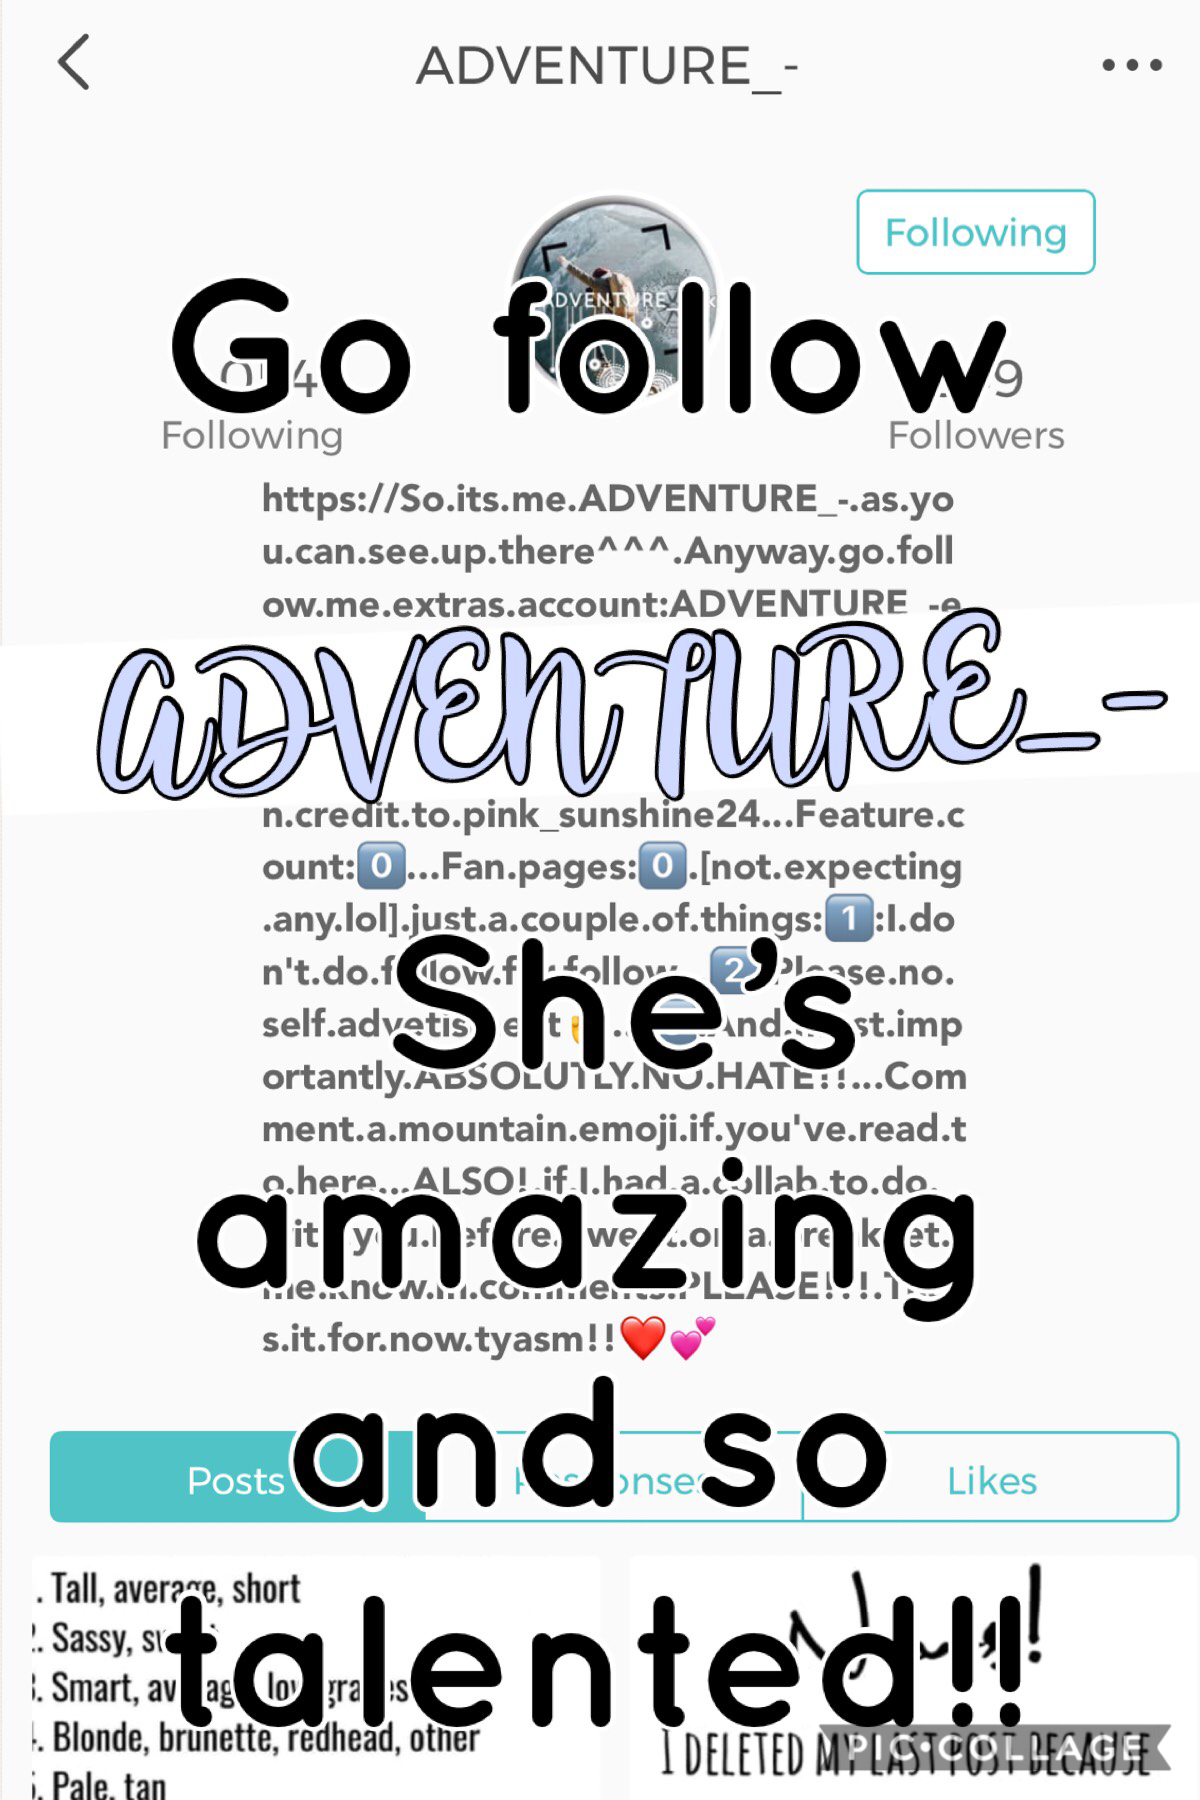 Follow ADVENTURE_- She’s so talented and awesome. Her collages are beautiful and deserves so many followers!💗💗💗💕💕💕💜💜💜❤️❤️❤️